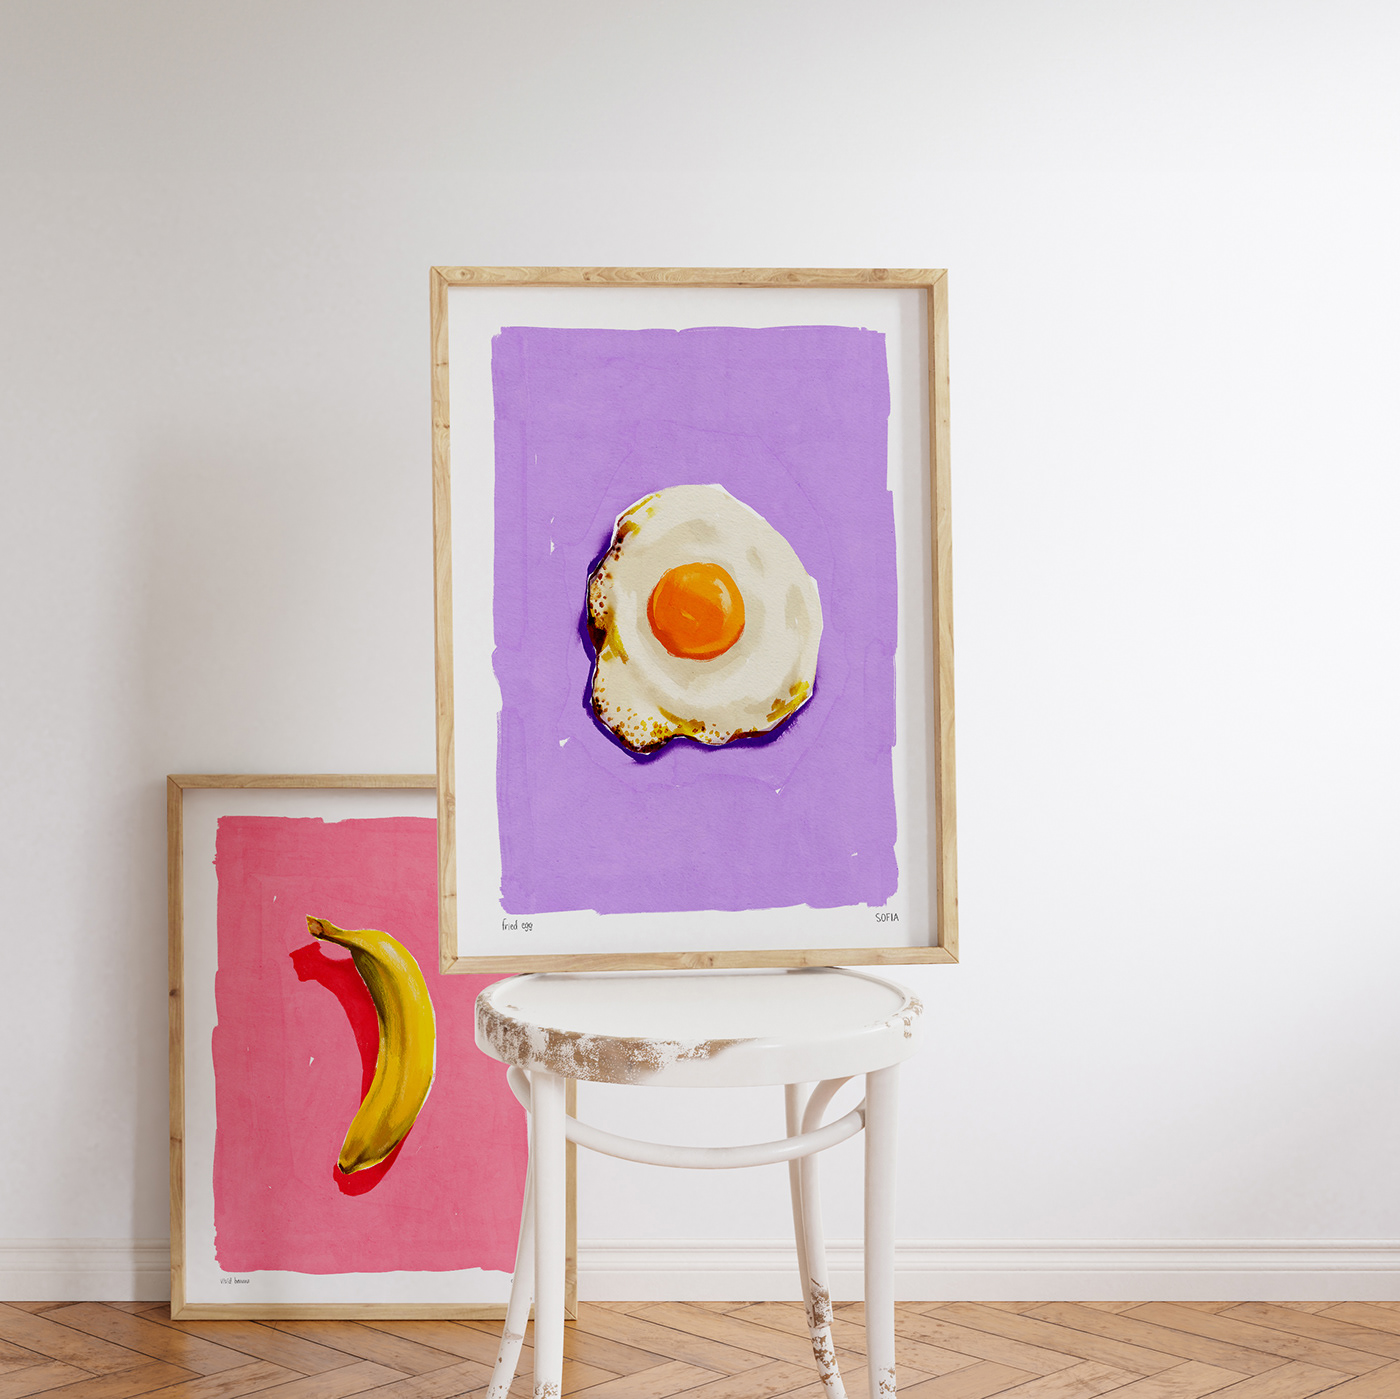 Gouache painting of a fried egg on purple colorful background wall decor shop